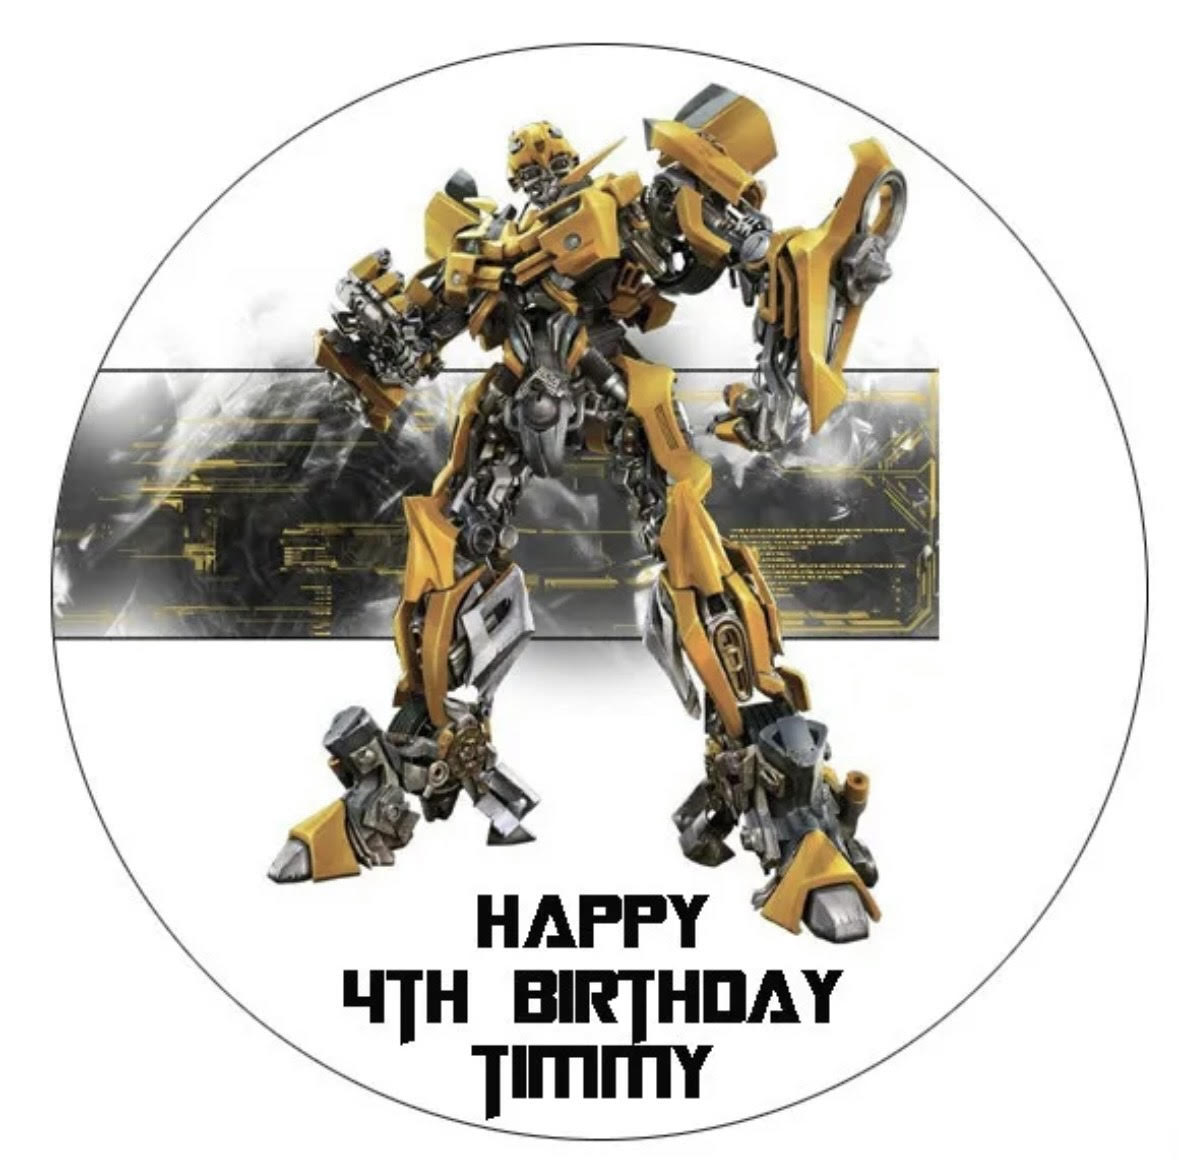 Transformers Bumblebee #2 Round Cake Edible Icing Image Topper 19cm